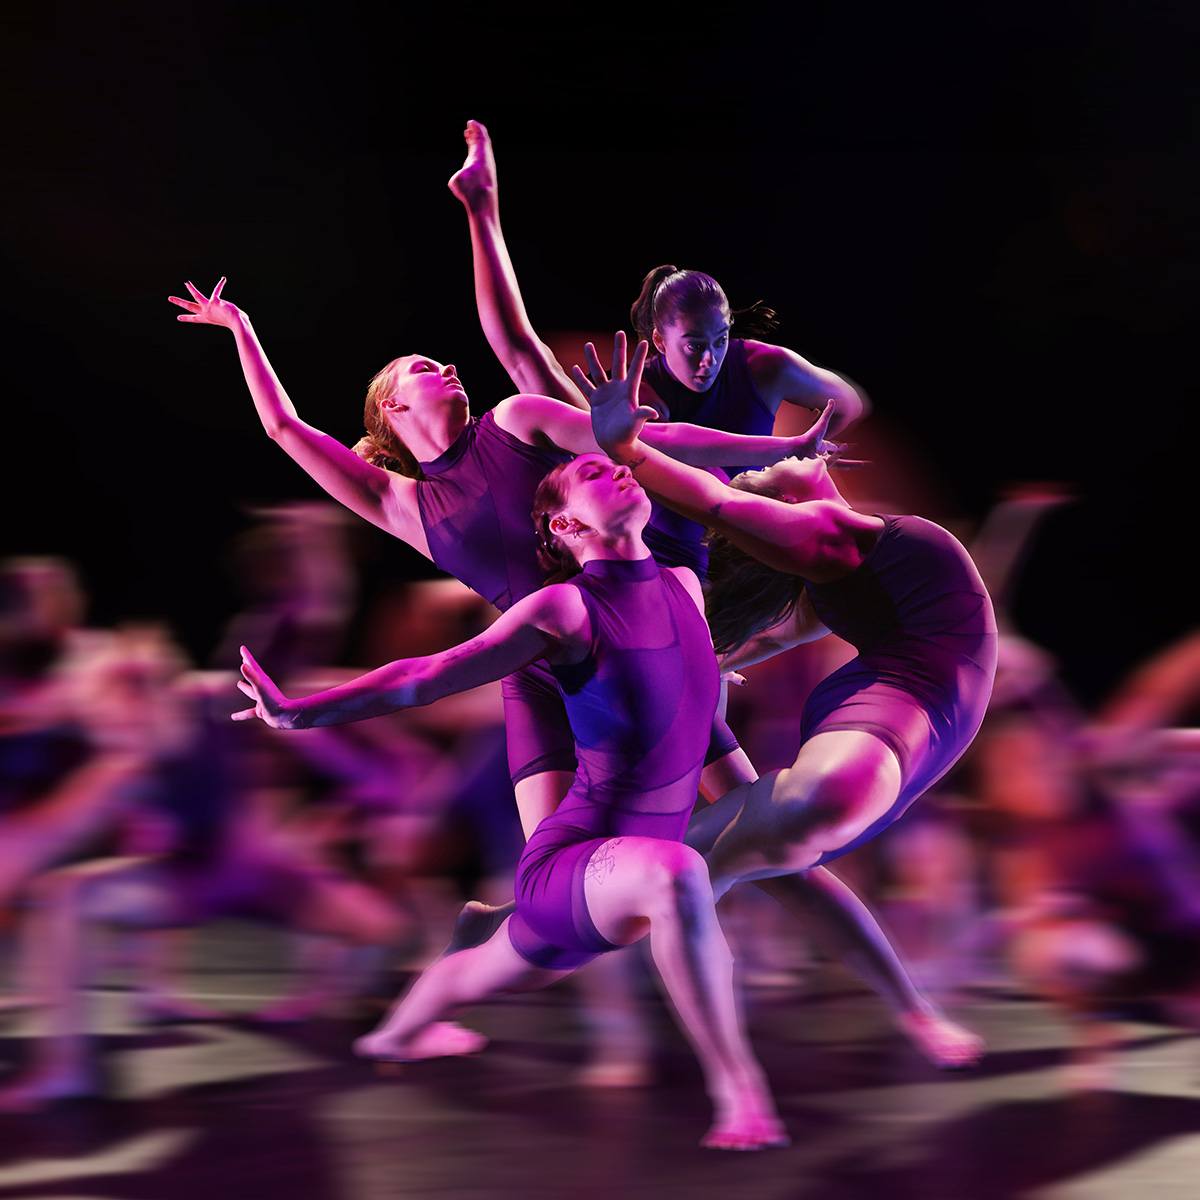 Blurry image of group of dancers in purple costumes 